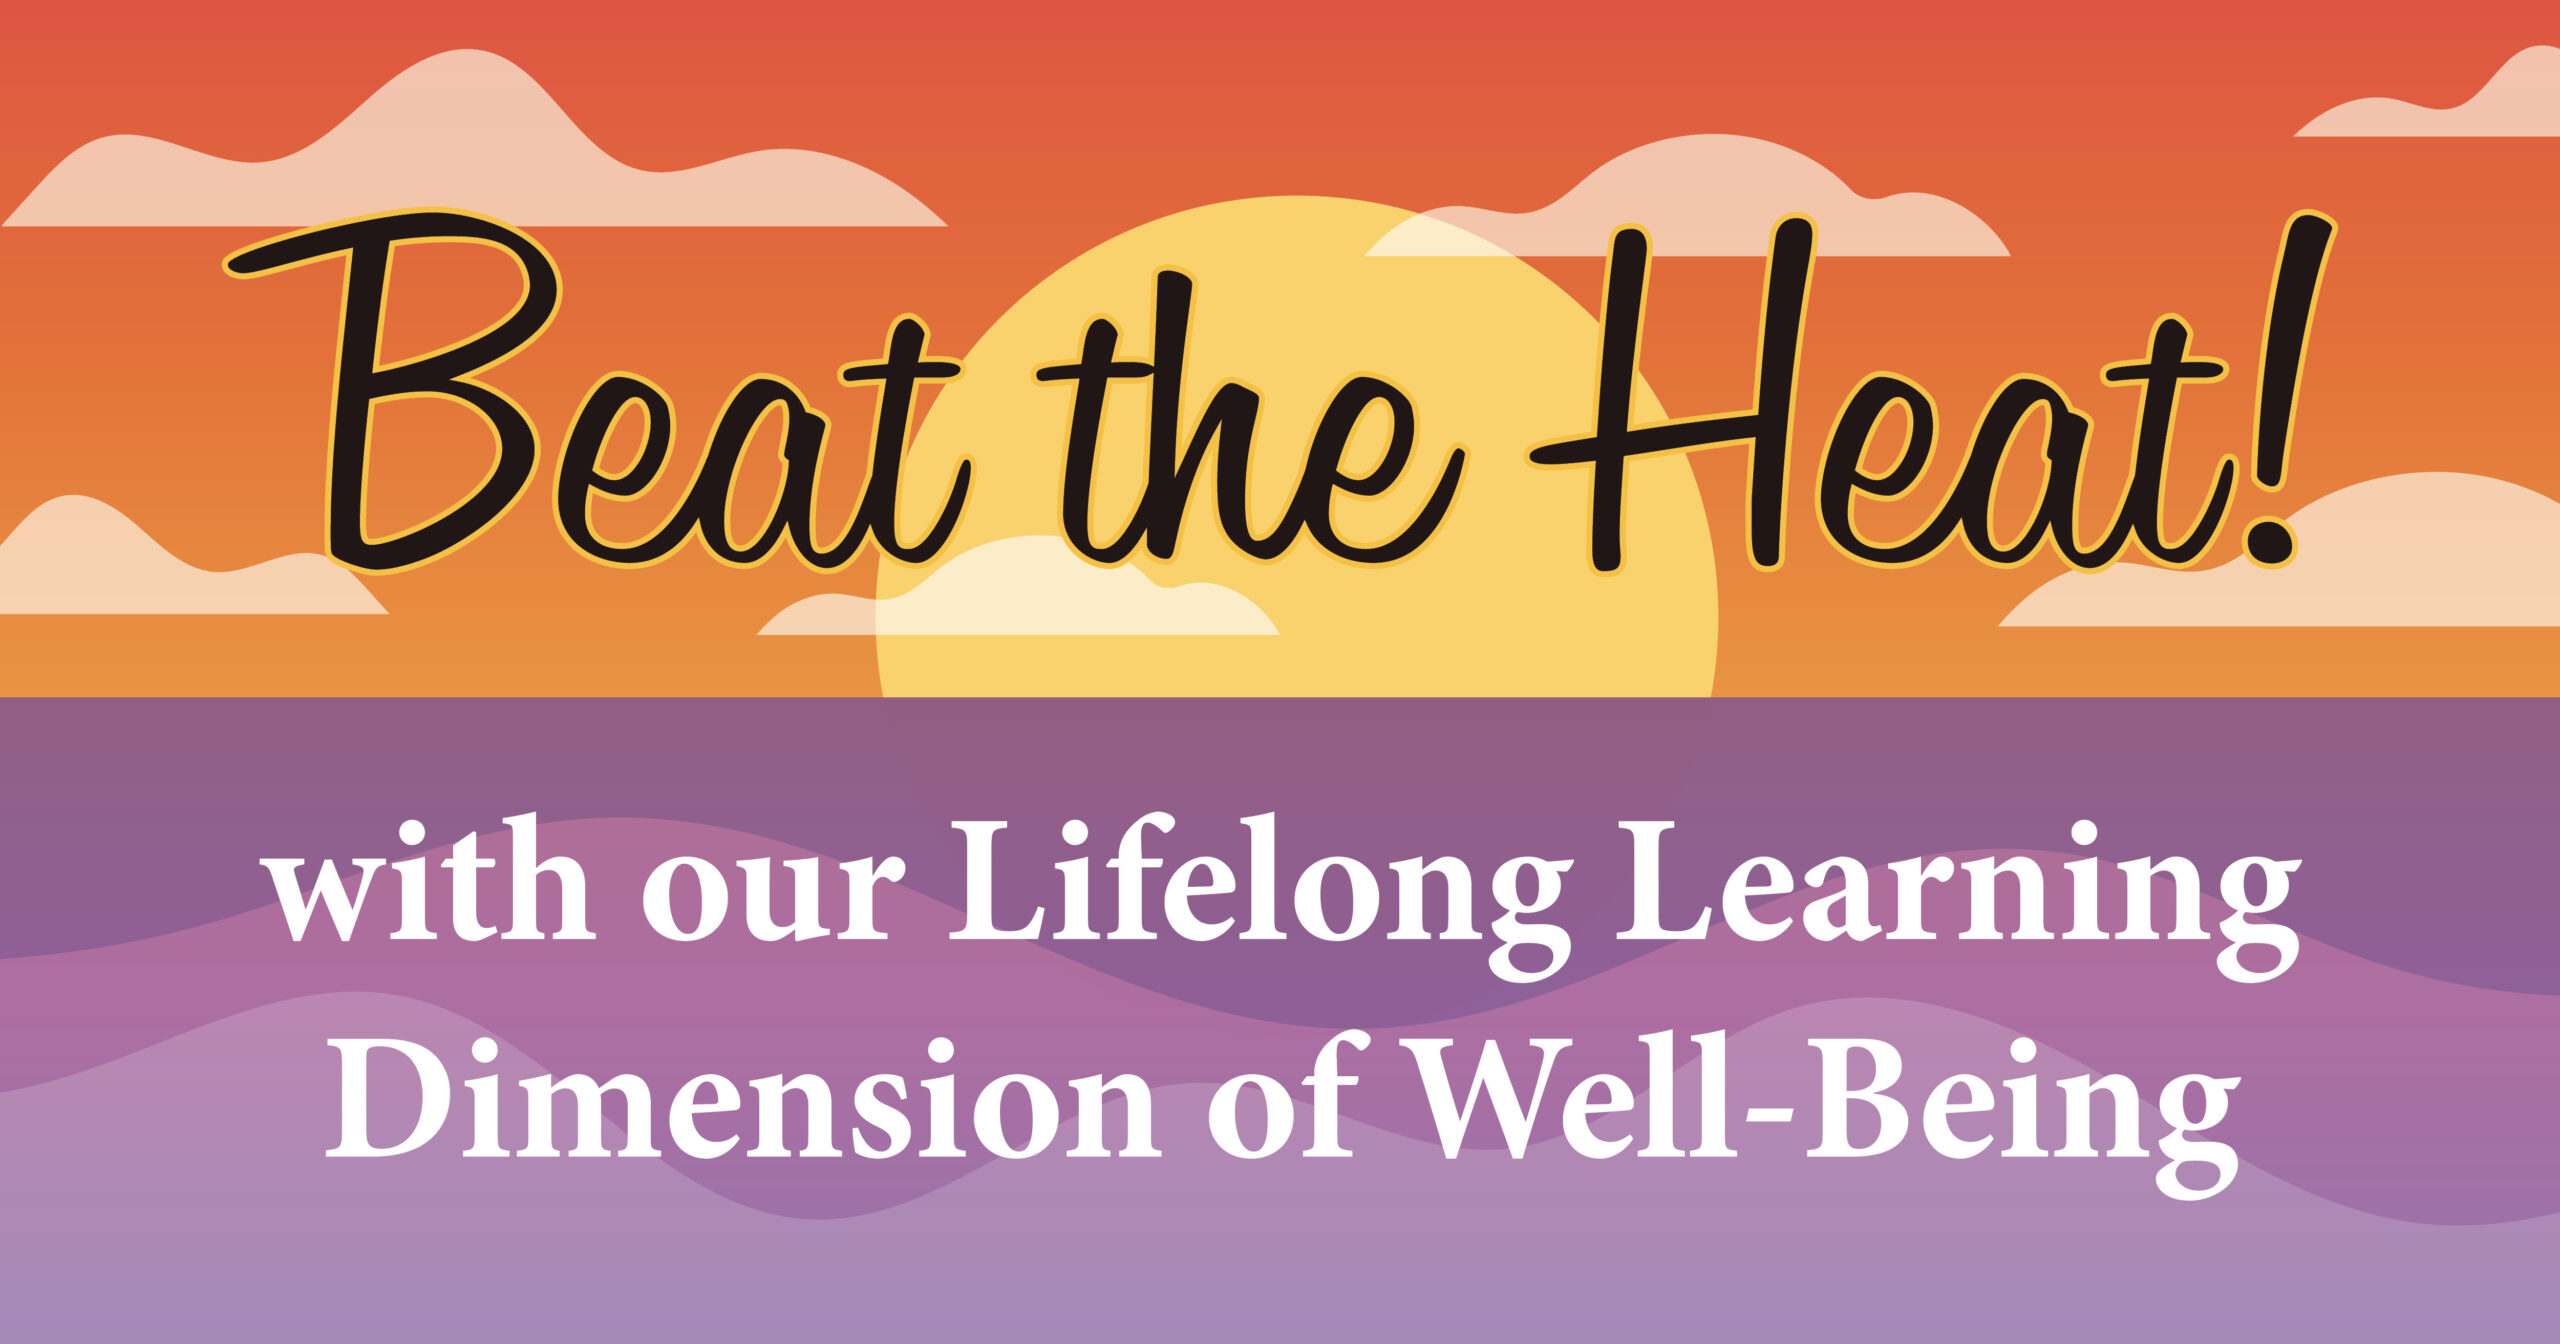 Beat The Heat With Lifelong Learning